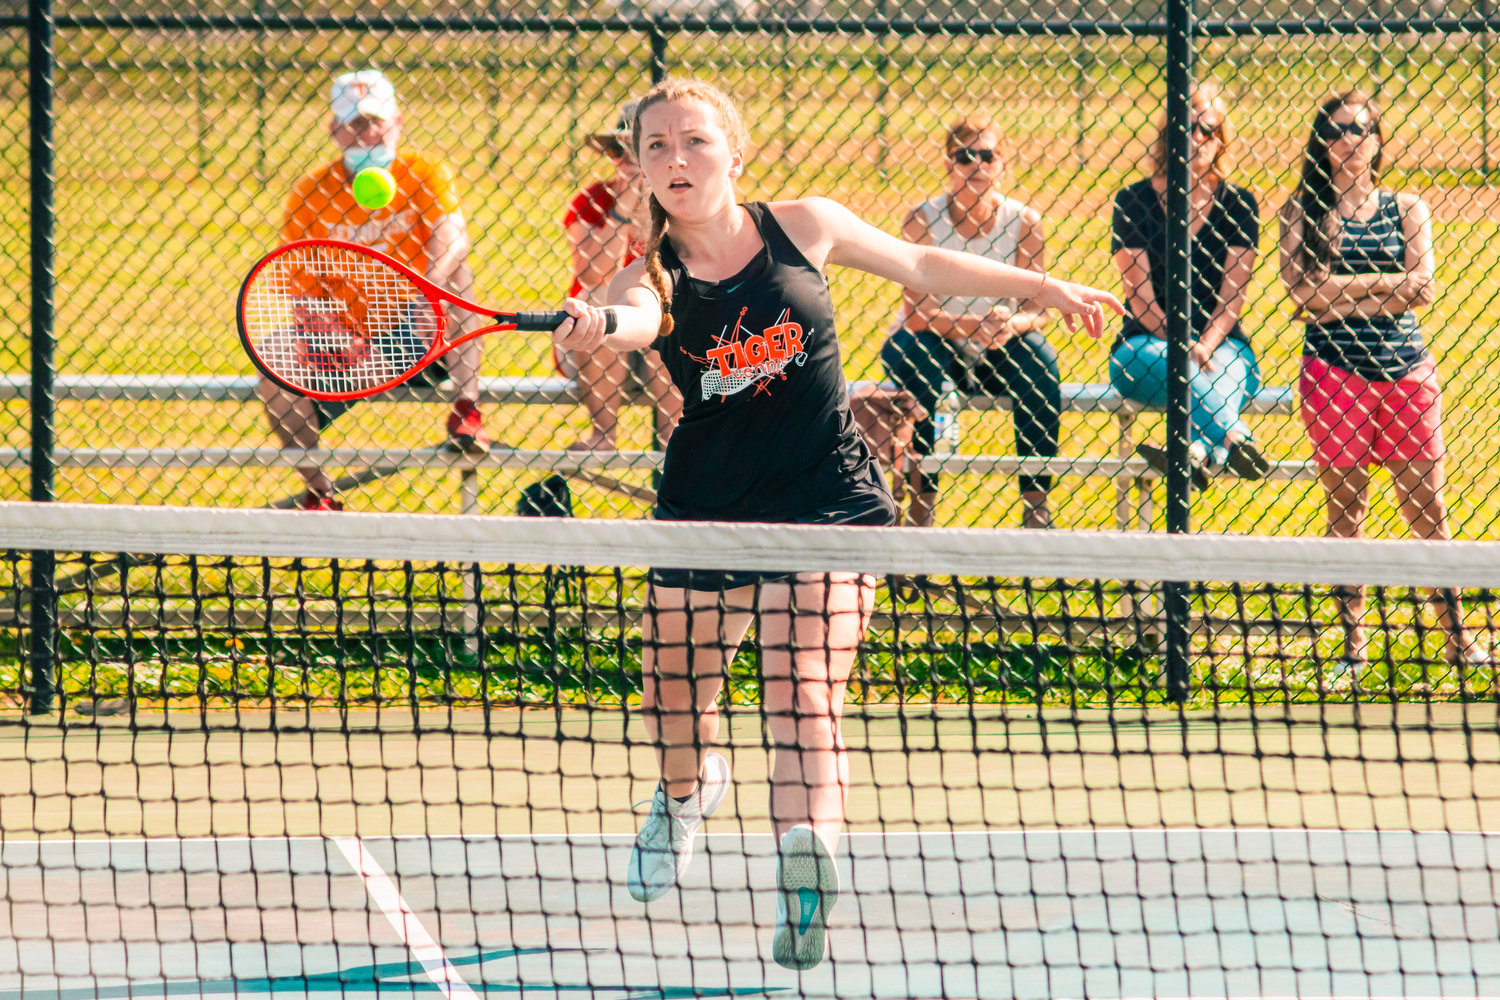 Centralia’s Serina Stehr returns a ball during a tennis match against Tumwater Wednesday afternoon.